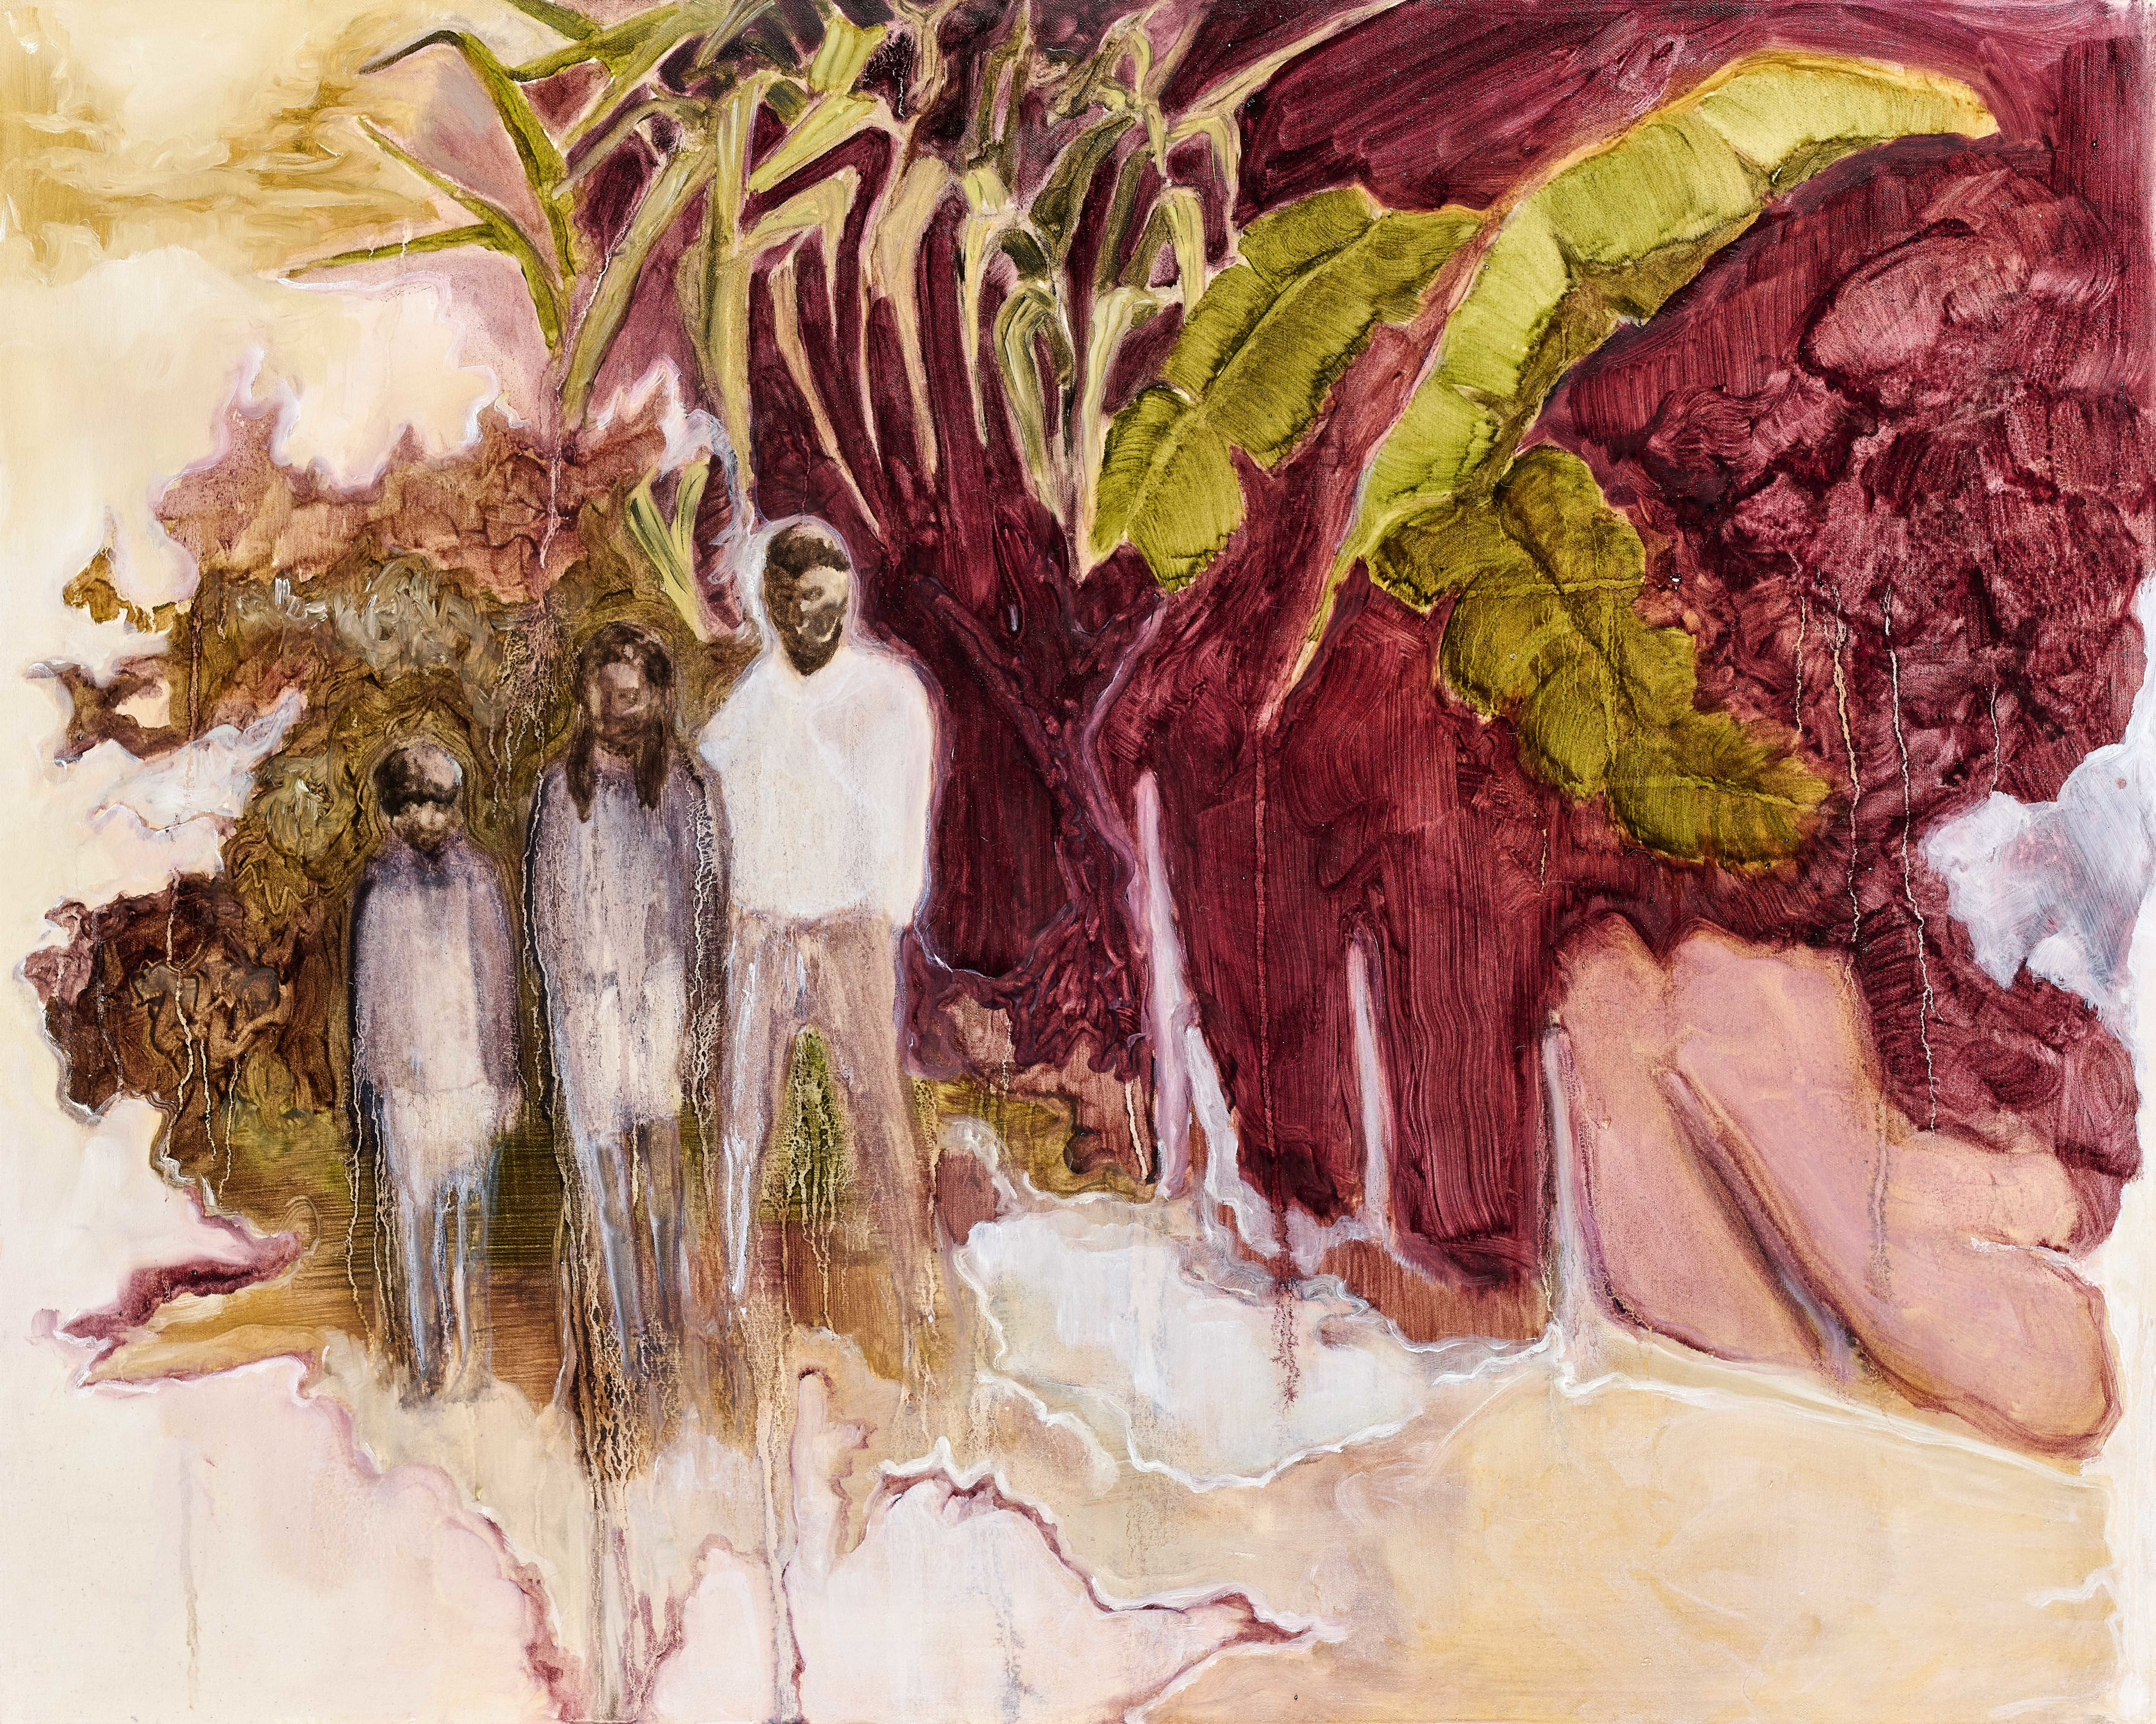 Ravelle Pillay | Tide and Seed - Goodman Gallery Johannesburg - Viewing Room - Goodman Gallery Viewing Room